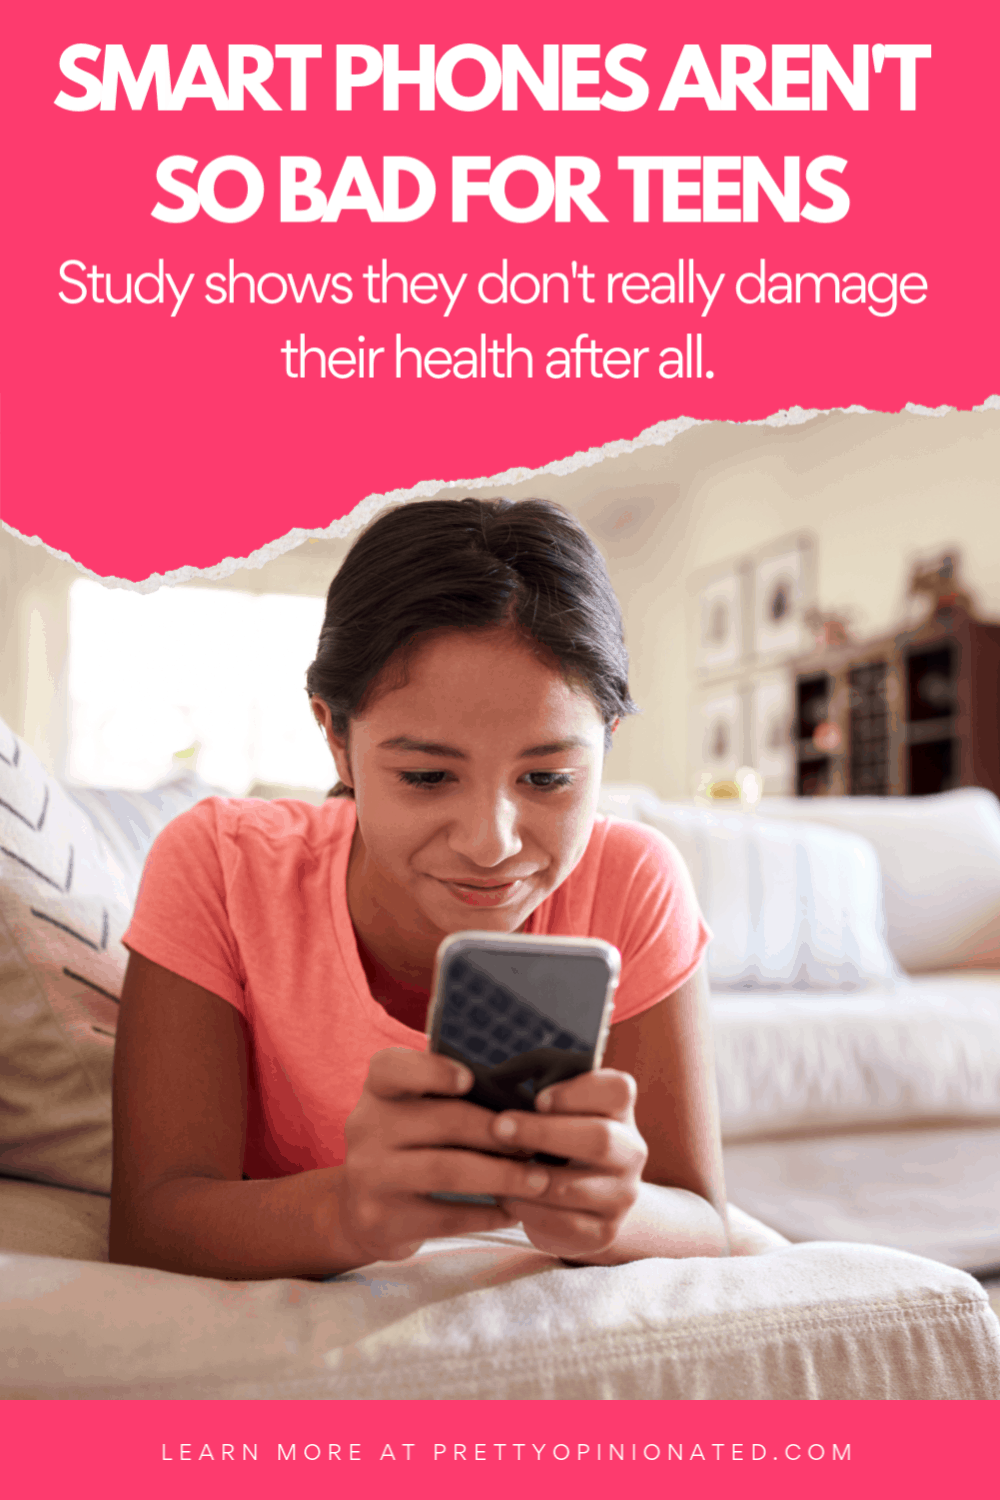 Smartphones ARE NOT Damaging Your Teens' Mental Health, New Study Shows